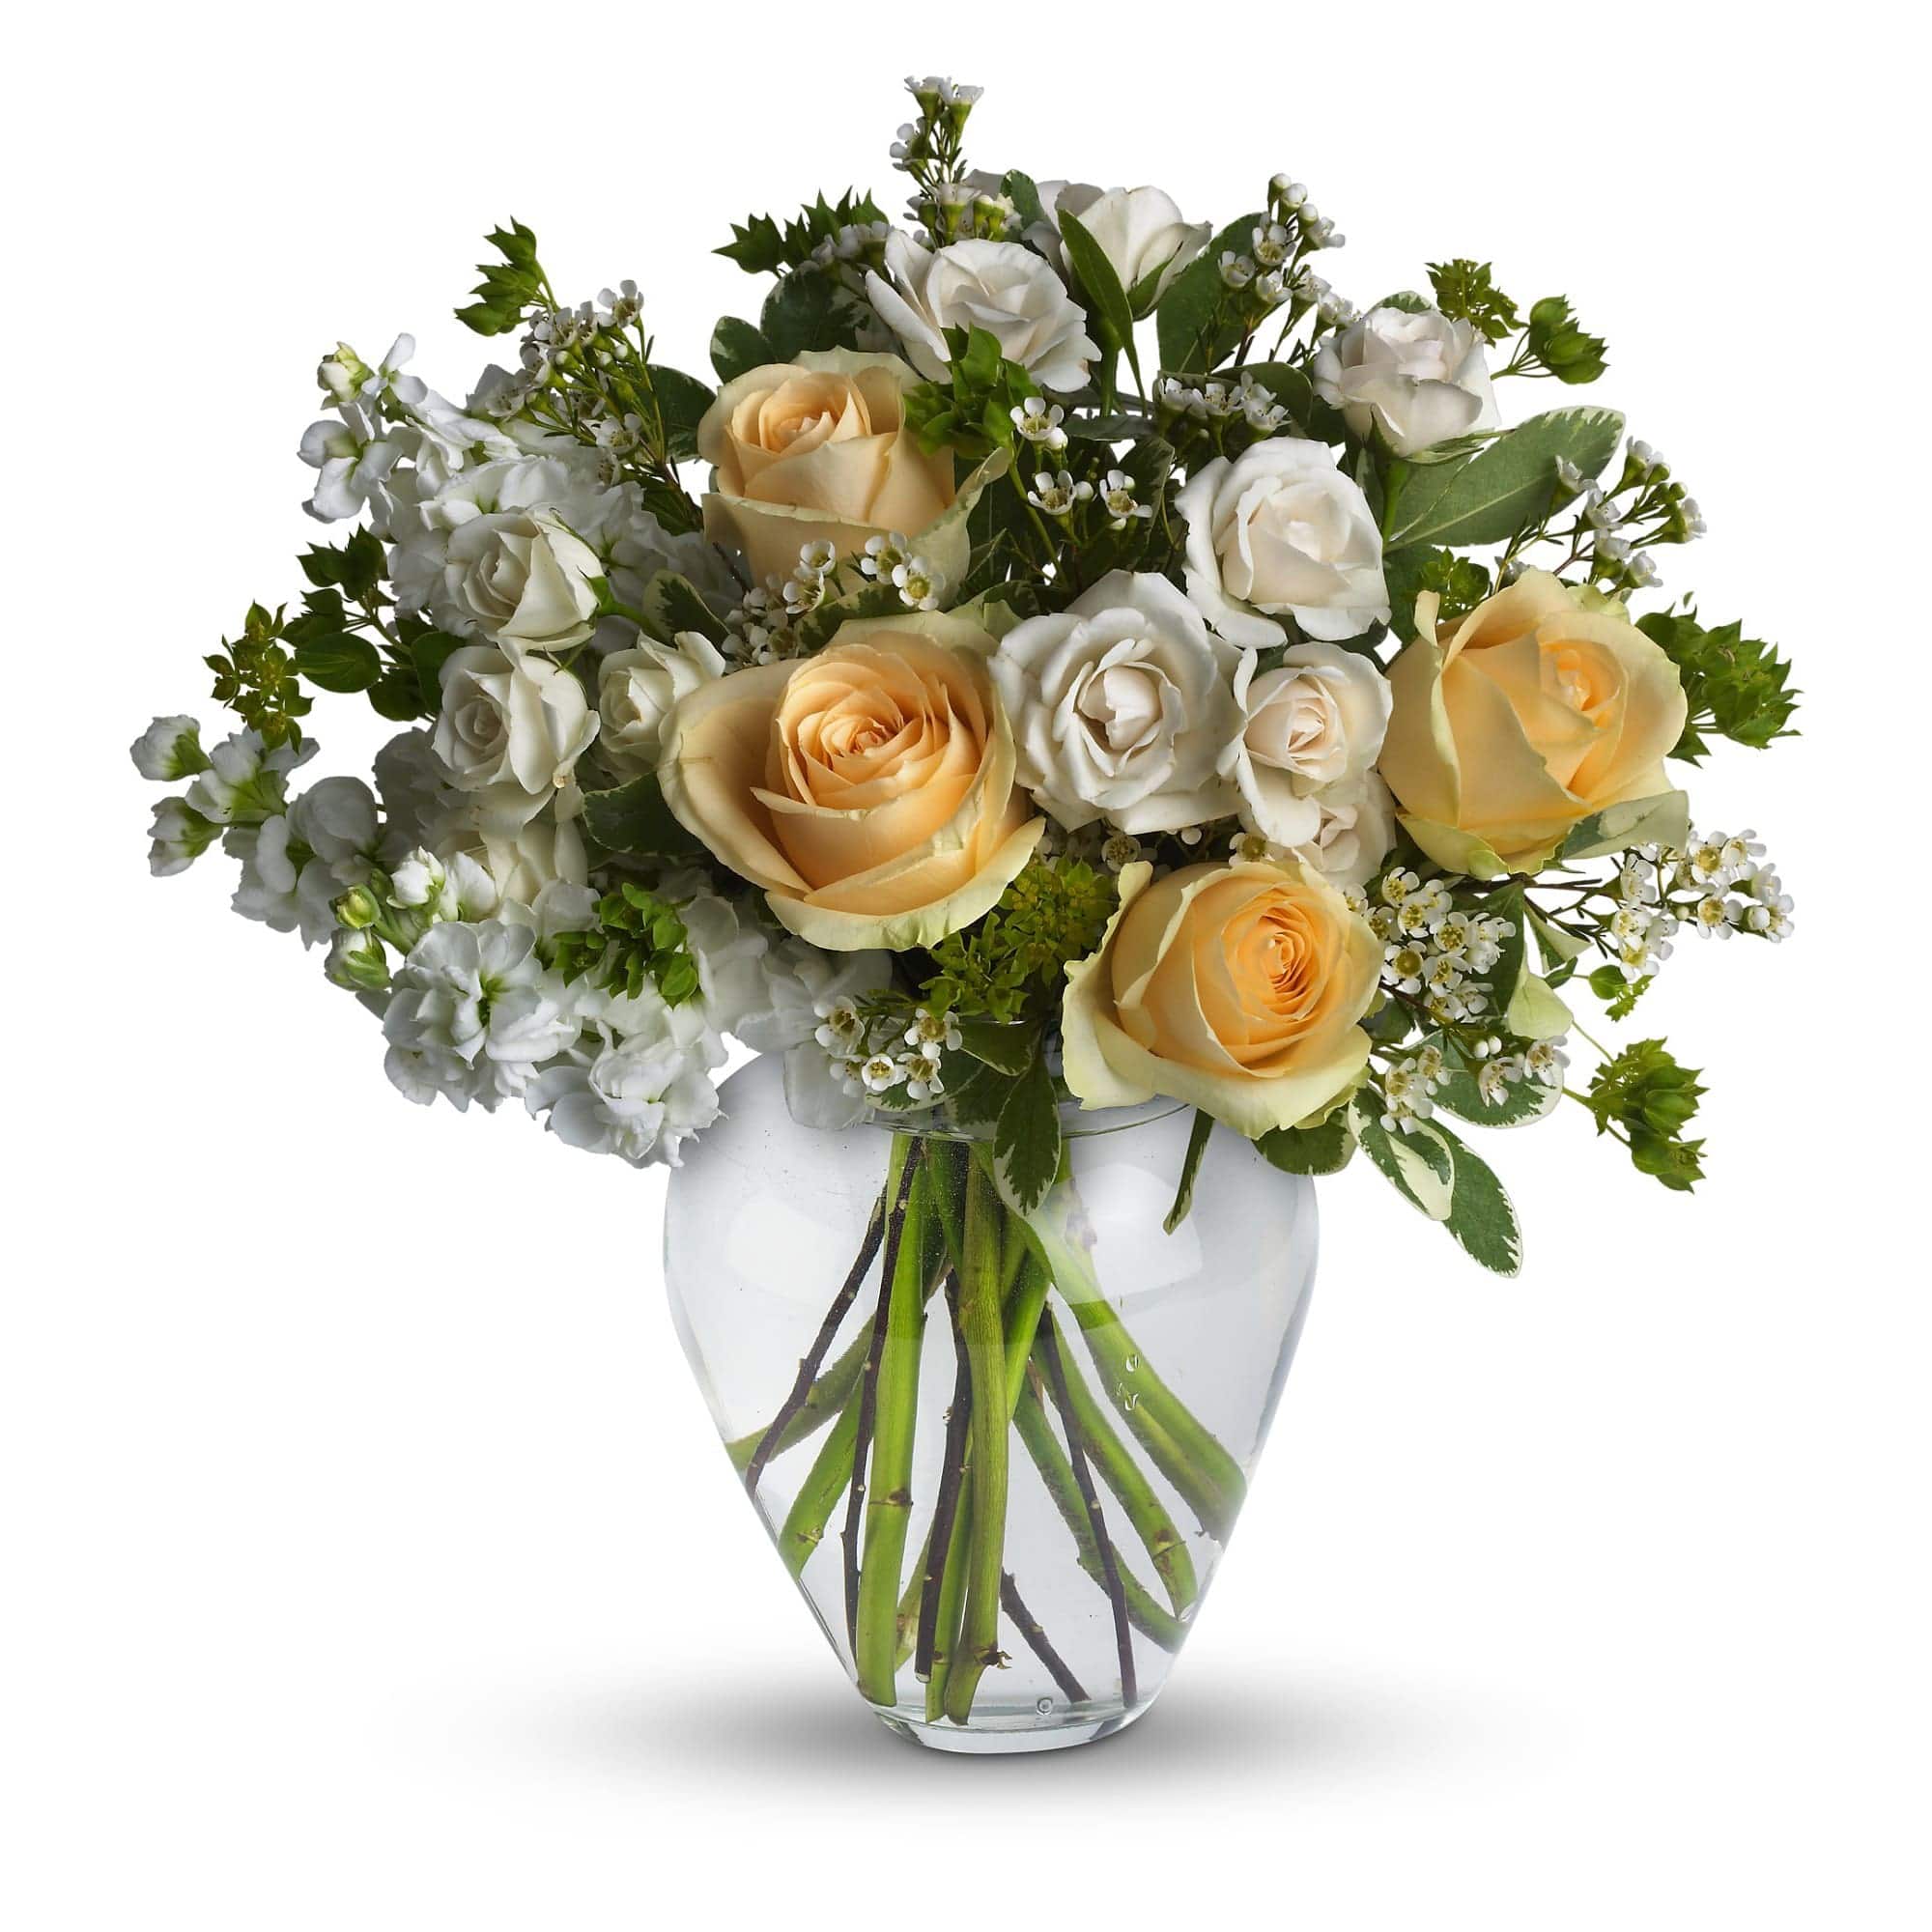 Crème and peach roses are mixed with white stock